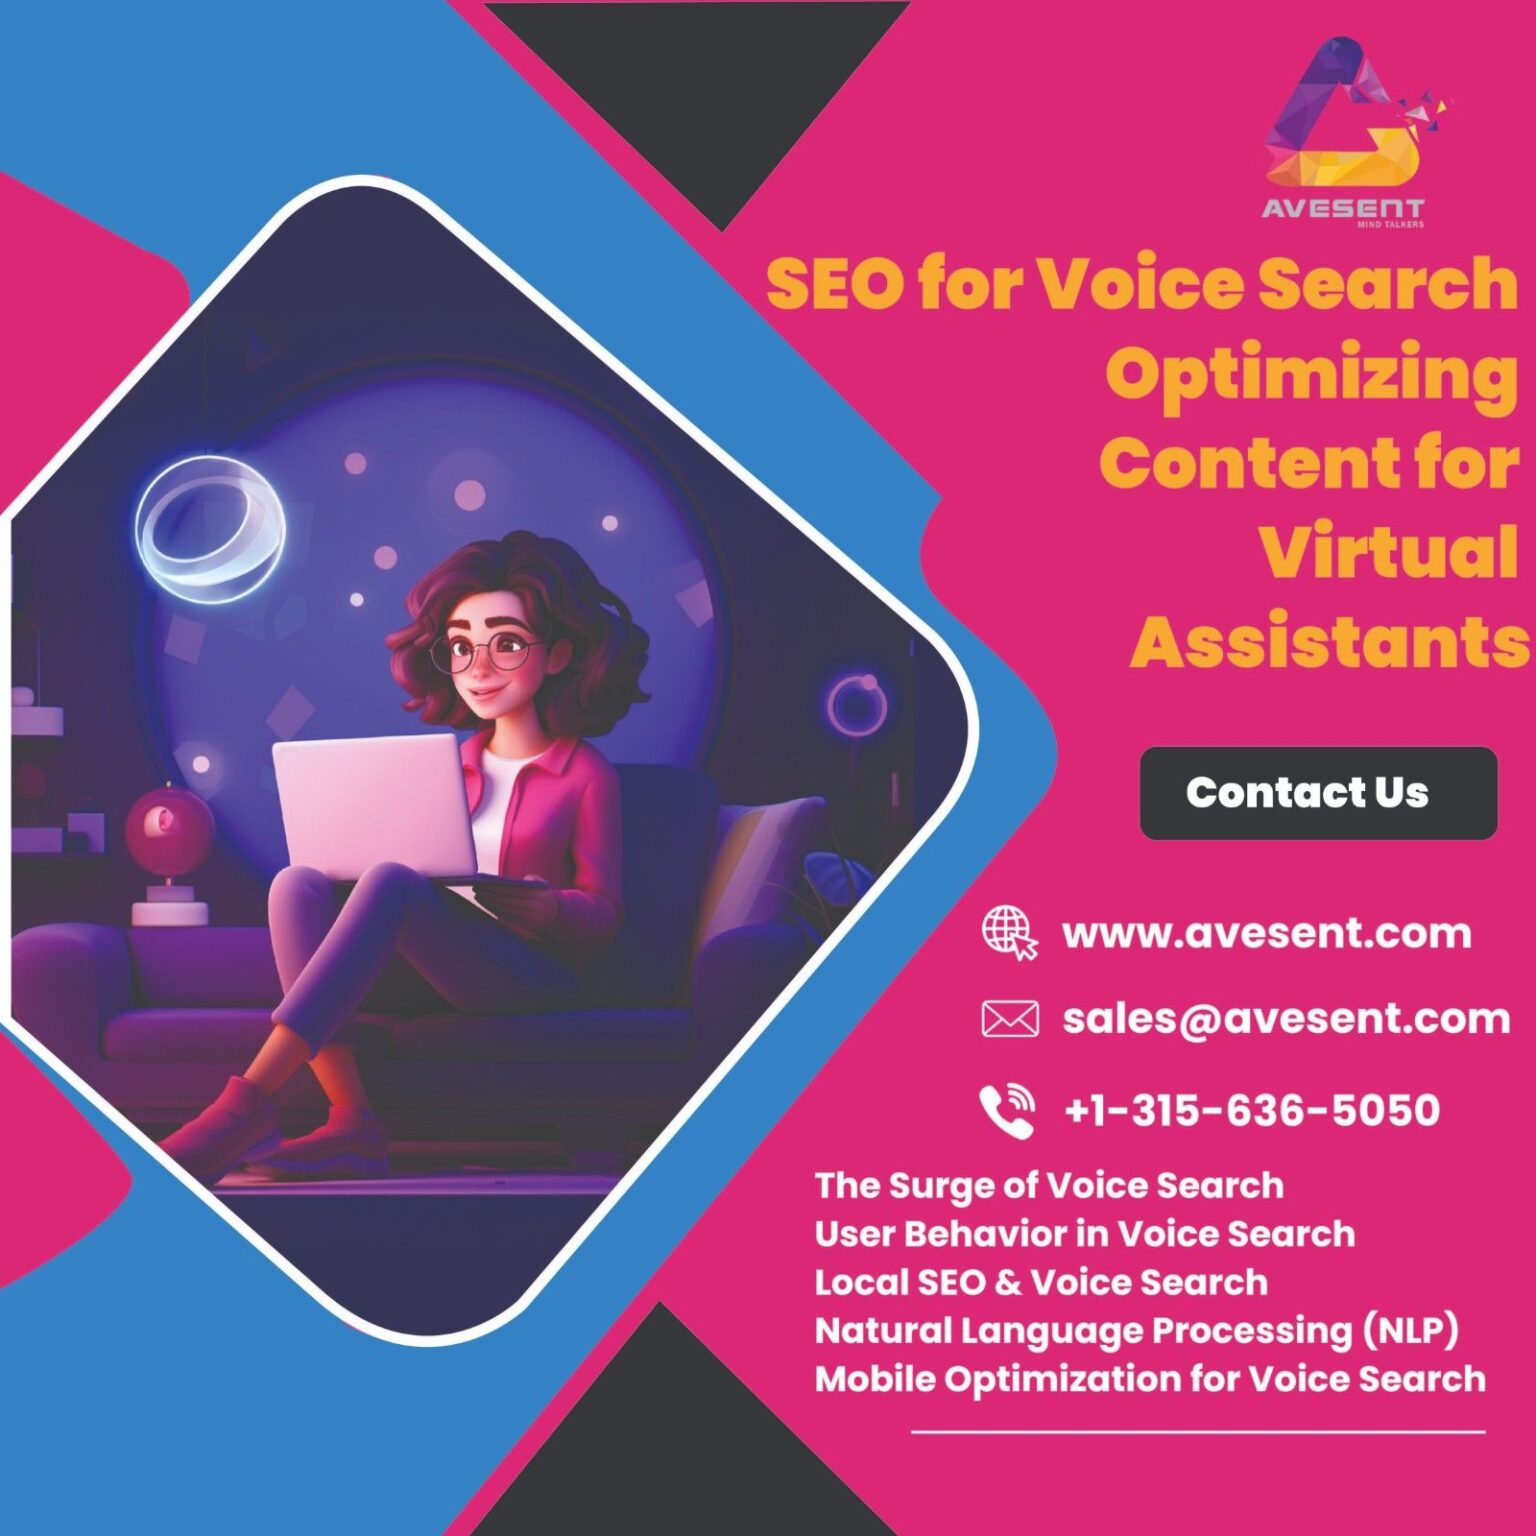 You are currently viewing “SEO for Voice Search: Optimizing Content for Virtual Assistants”